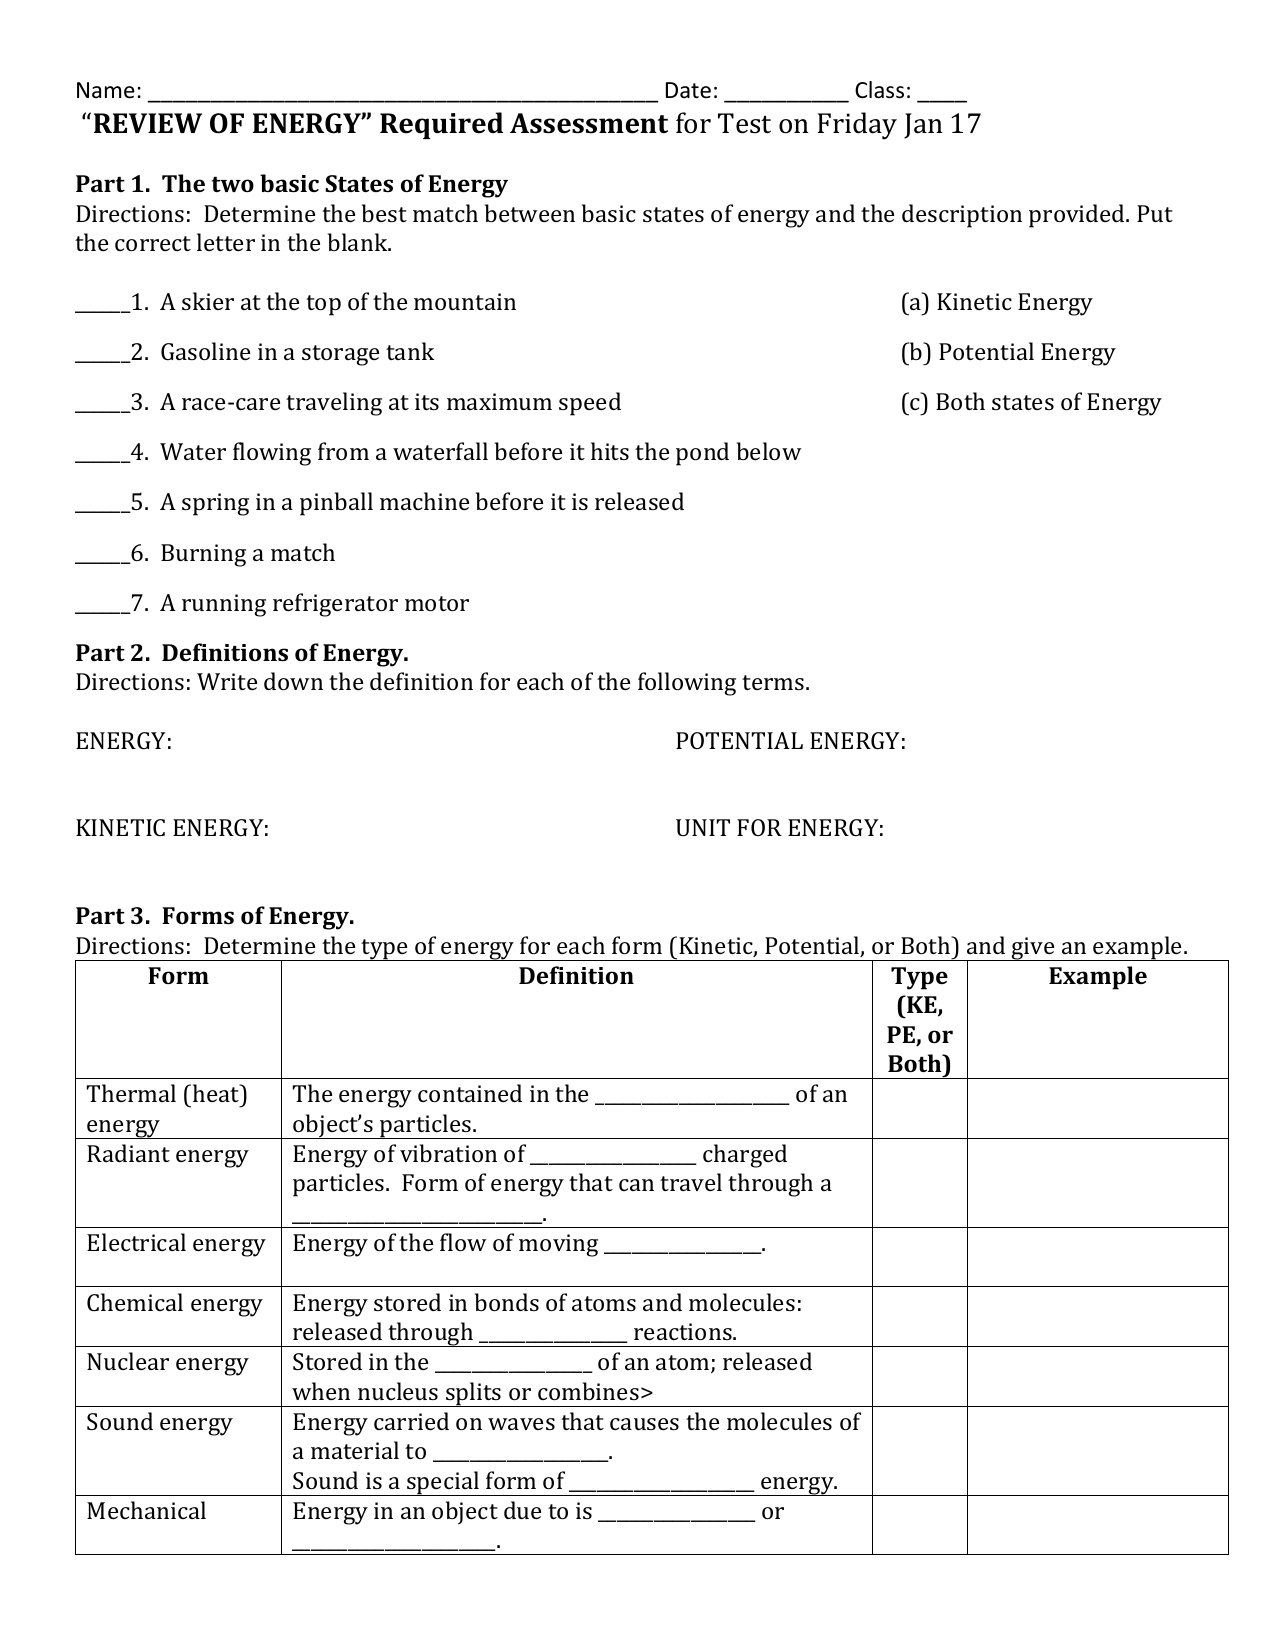 forms-of-energy-worksheet-answers